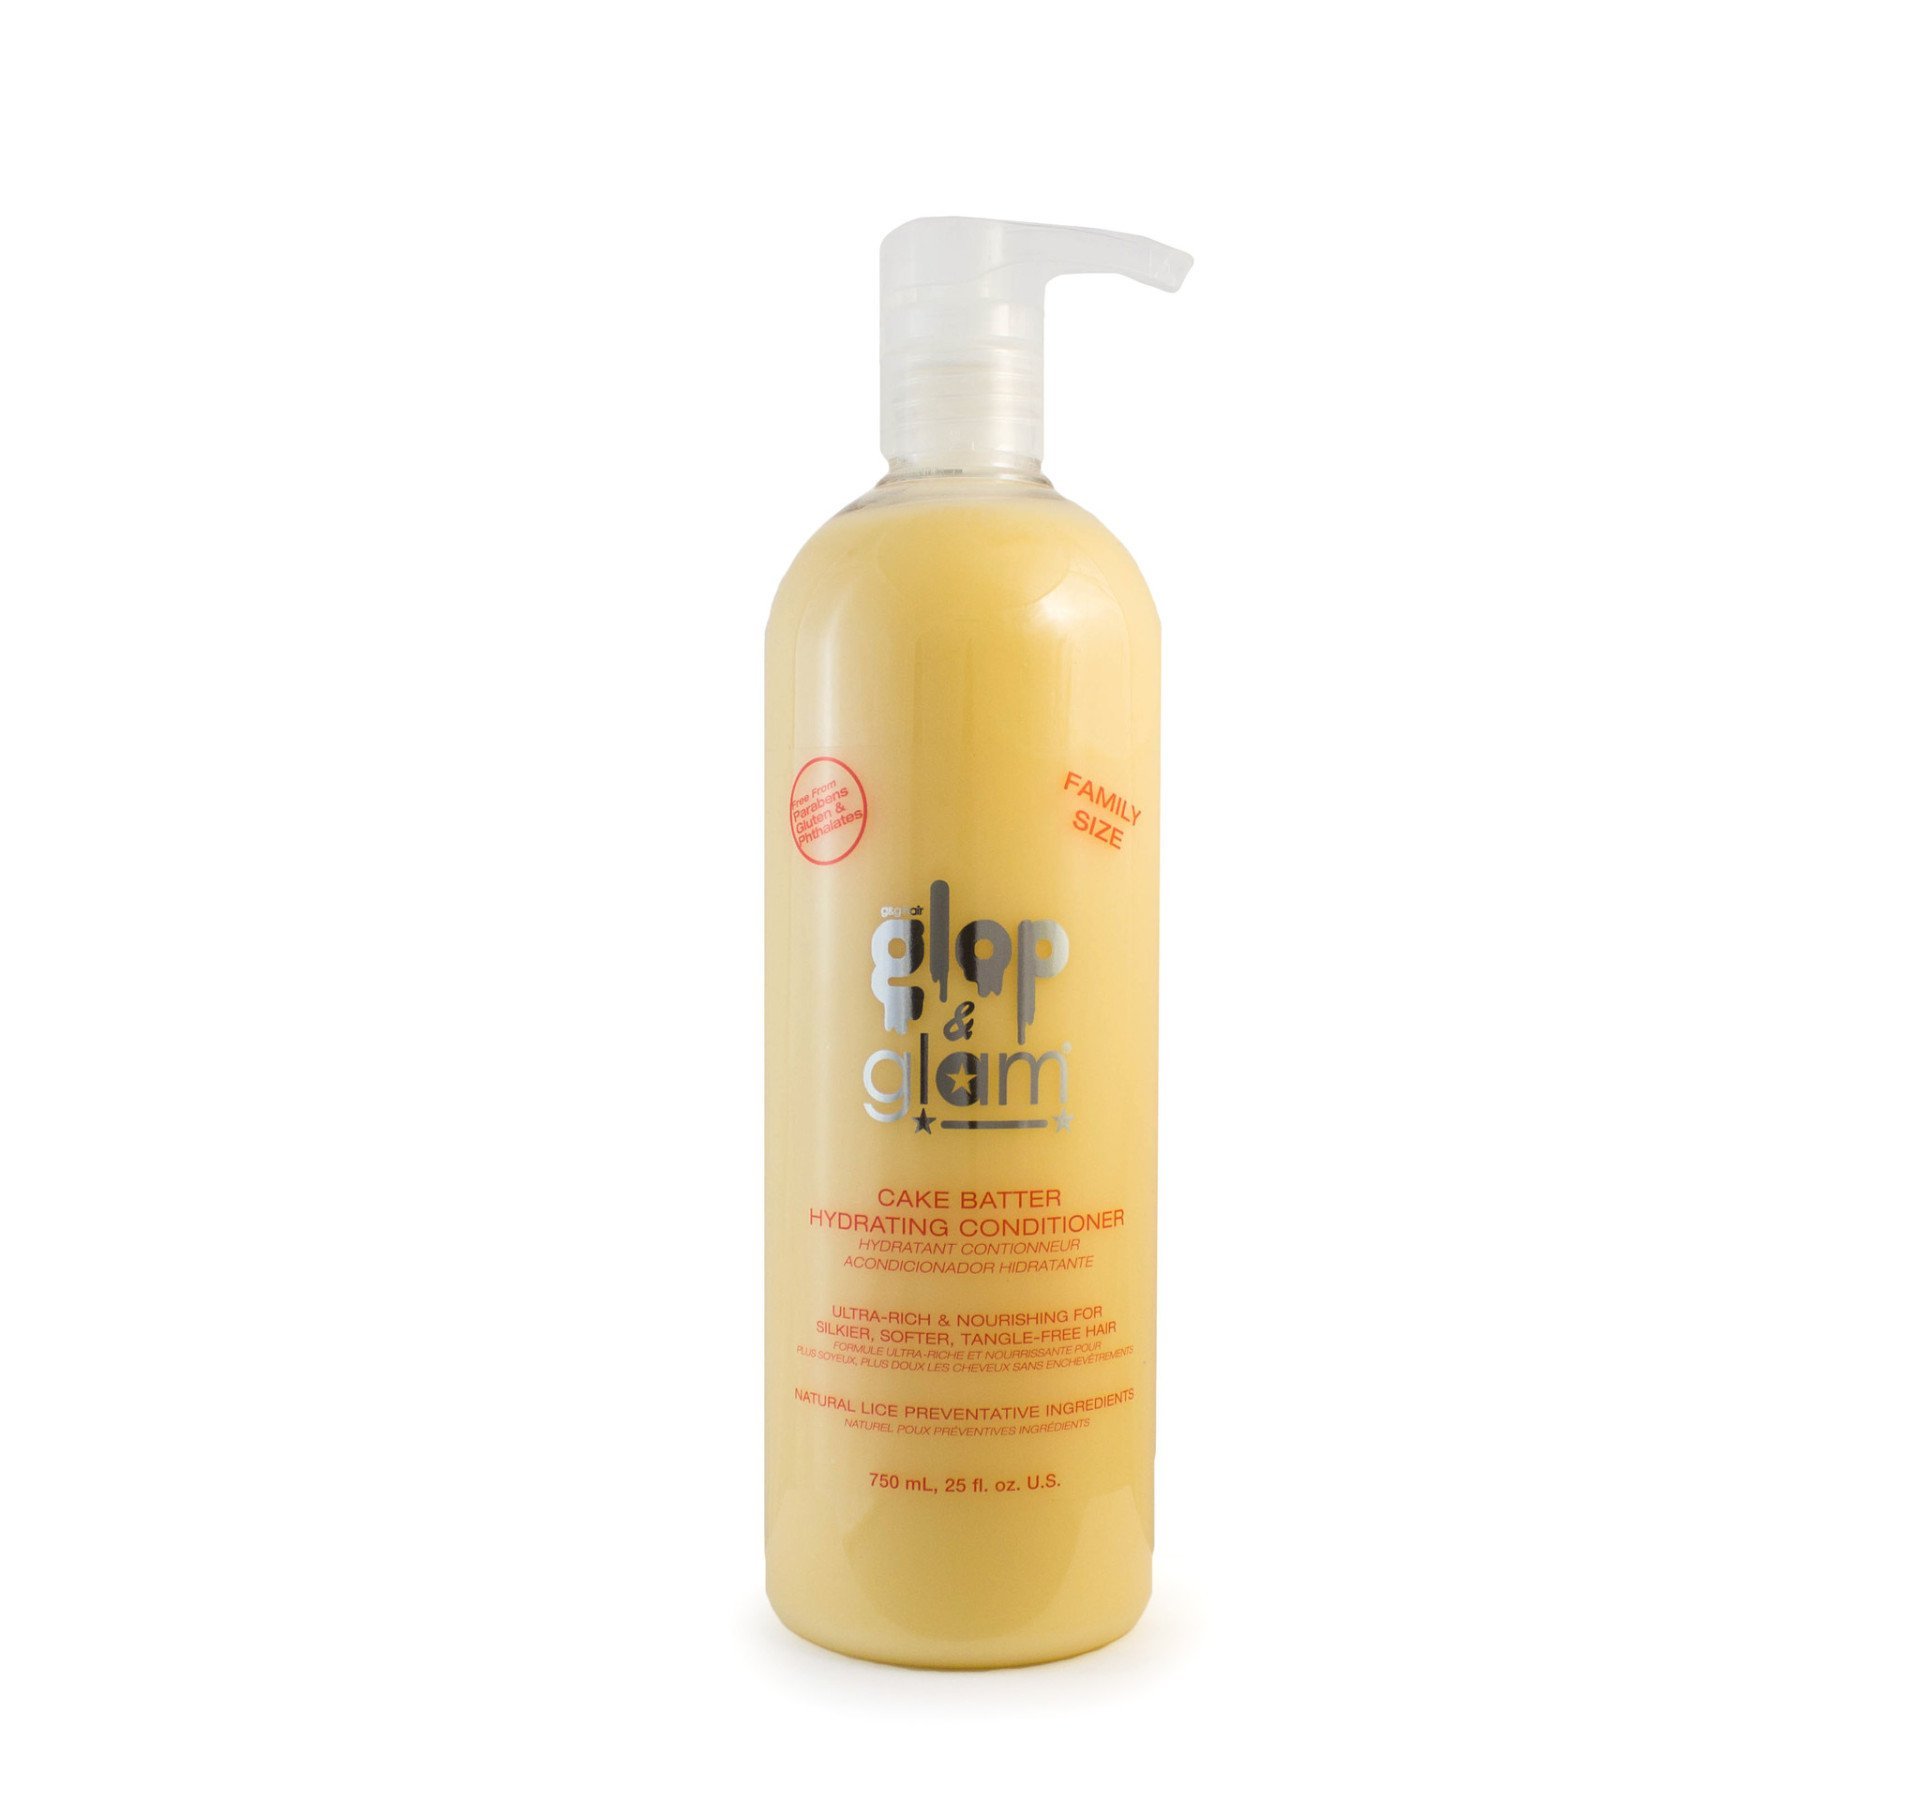 Glop and Glam Cake Batter conditioner family sized for sale at Lice Clinics of Mckinney.